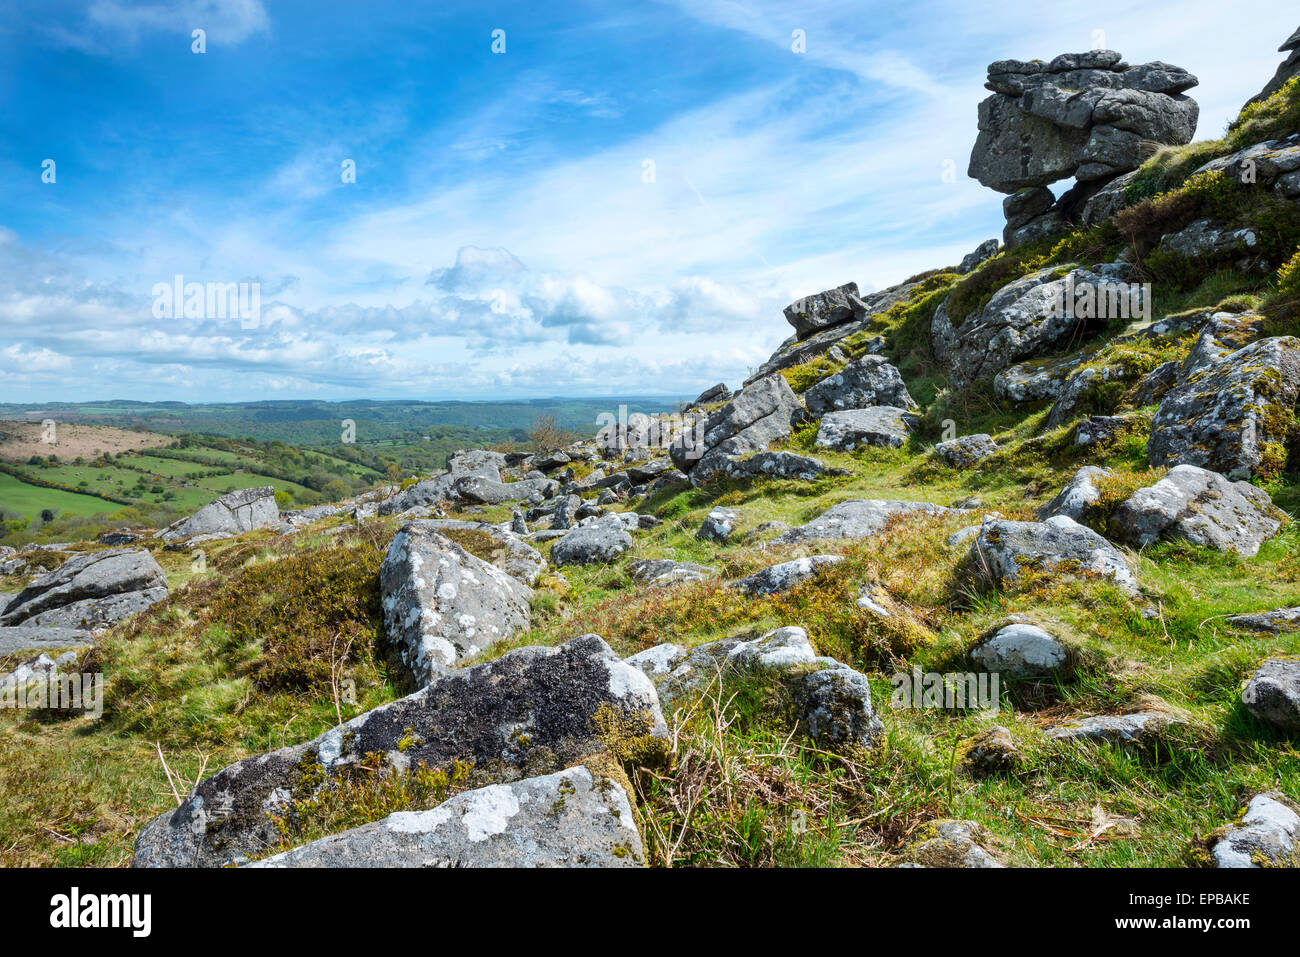 View of Datrmoor tor and valley beyond, Devon, England Stock Photo